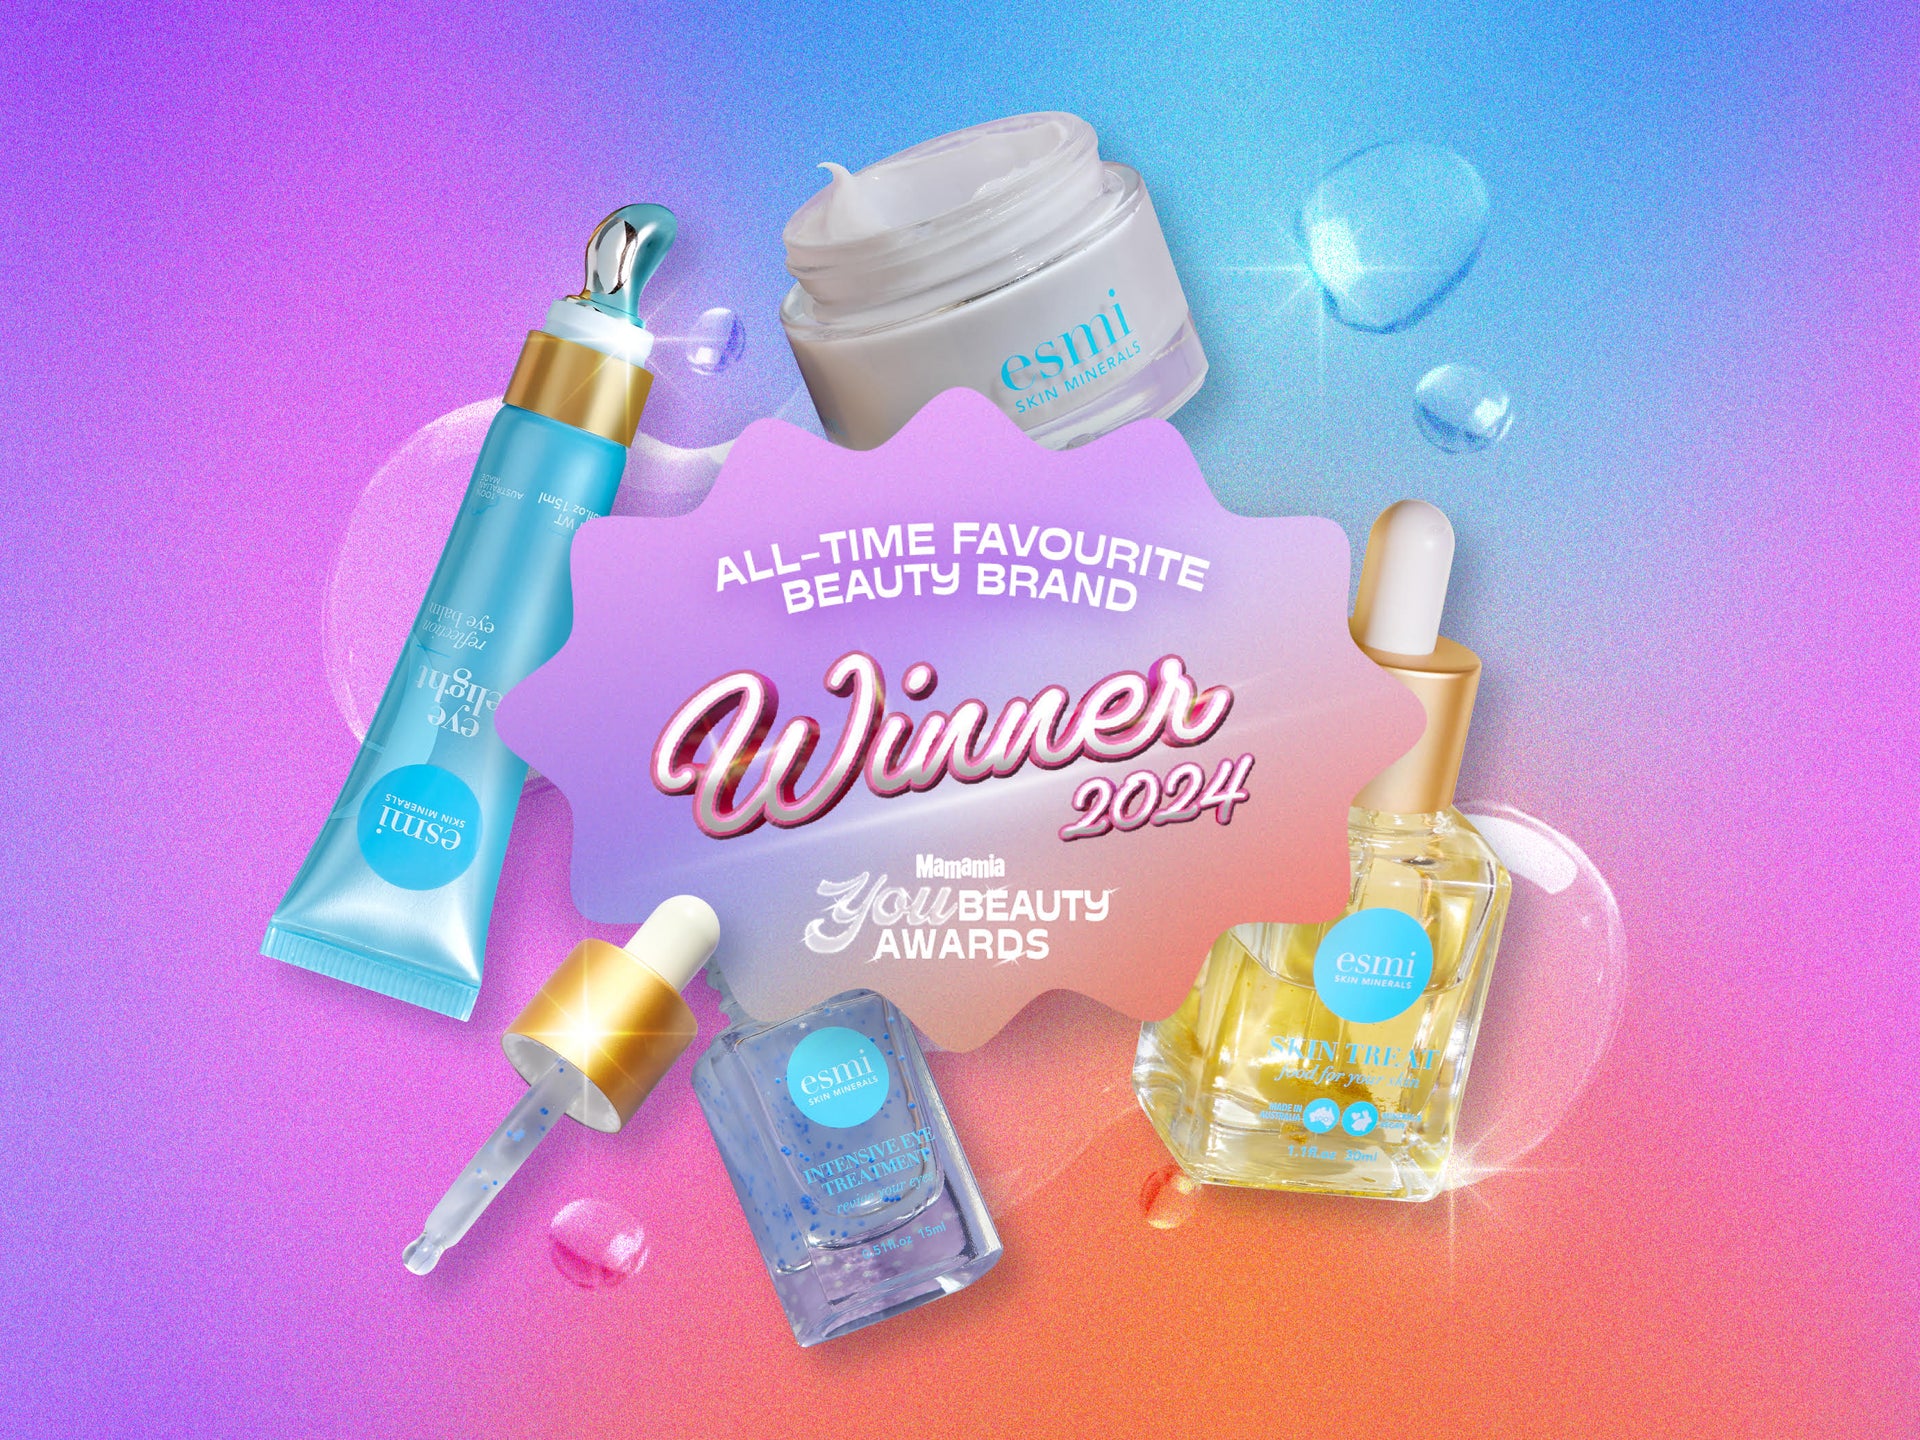 'All-Time Favourite Beauty Brand' Winners 🌟